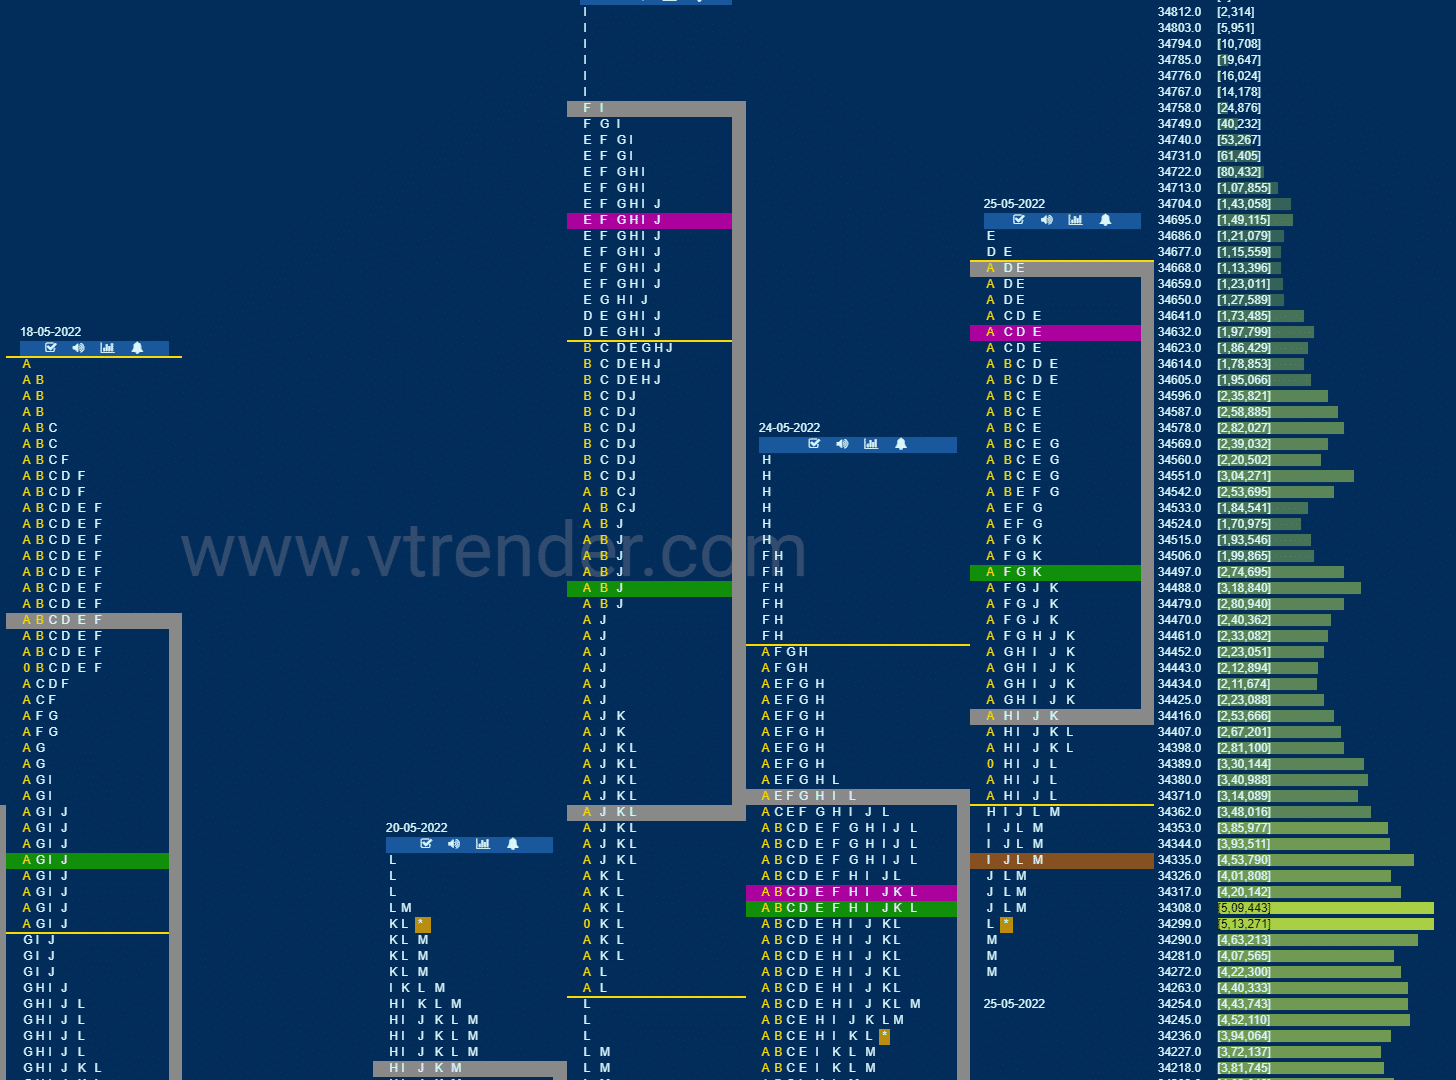 Bnf 17 Market Profile Analysis Dated 25Th May 2022 Banknifty Futures, Charts, Day Trading, Intraday Trading, Intraday Trading Strategies, Market Profile, Market Profile Trading Strategies, Nifty Futures, Order Flow Analysis, Support And Resistance, Technical Analysis, Trading Strategies, Volume Profile Trading